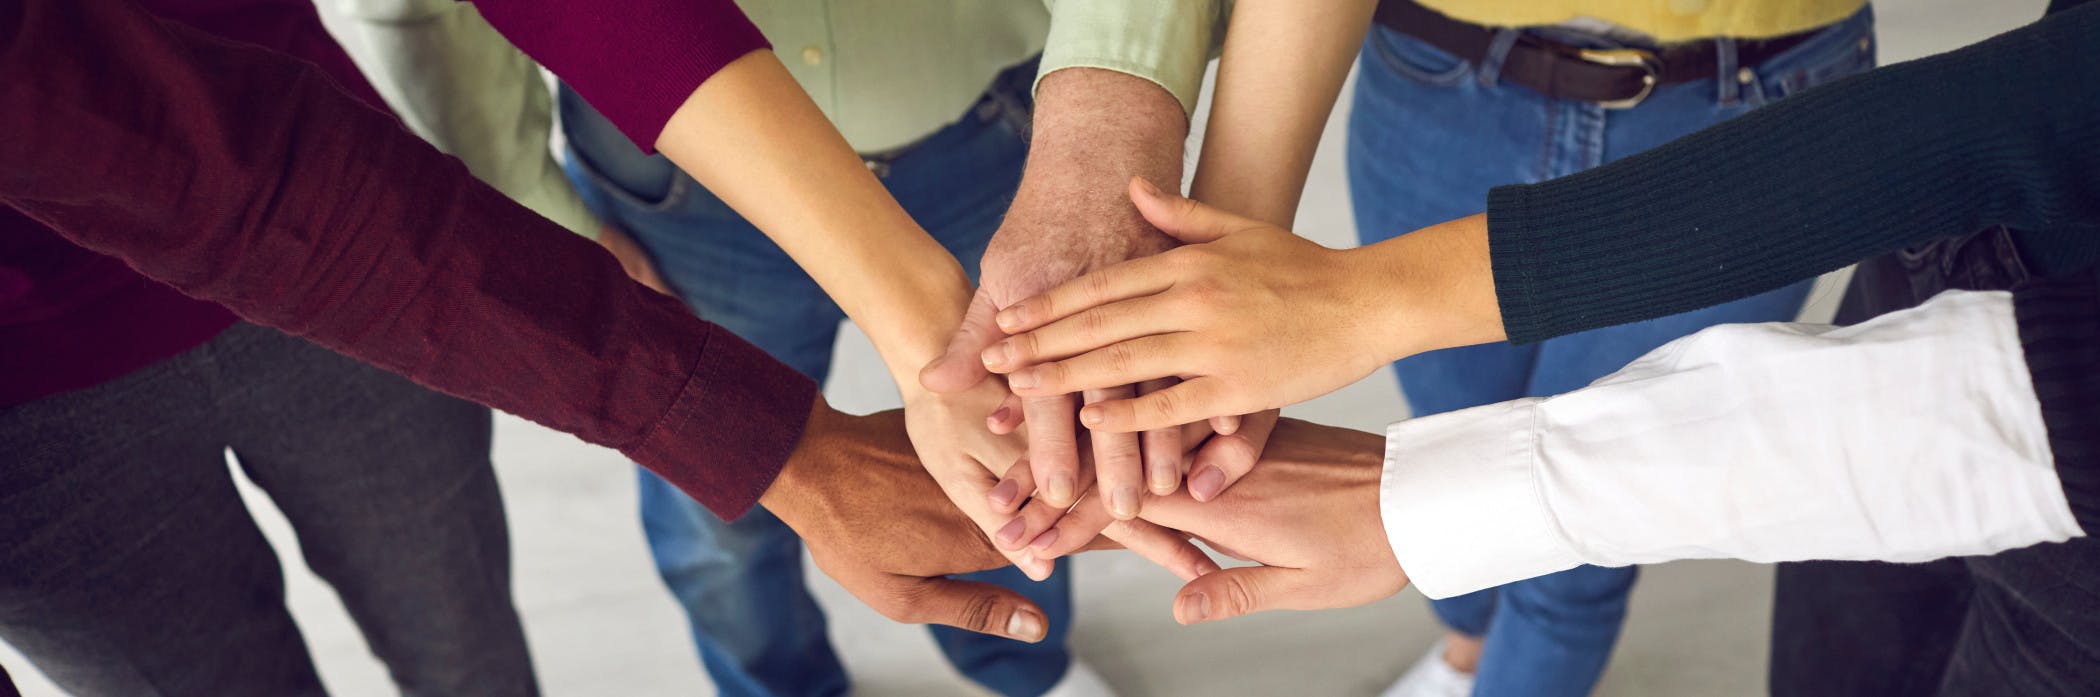 Diverse group of people with their hands together in the center of a circle to show a sense of community and shared work